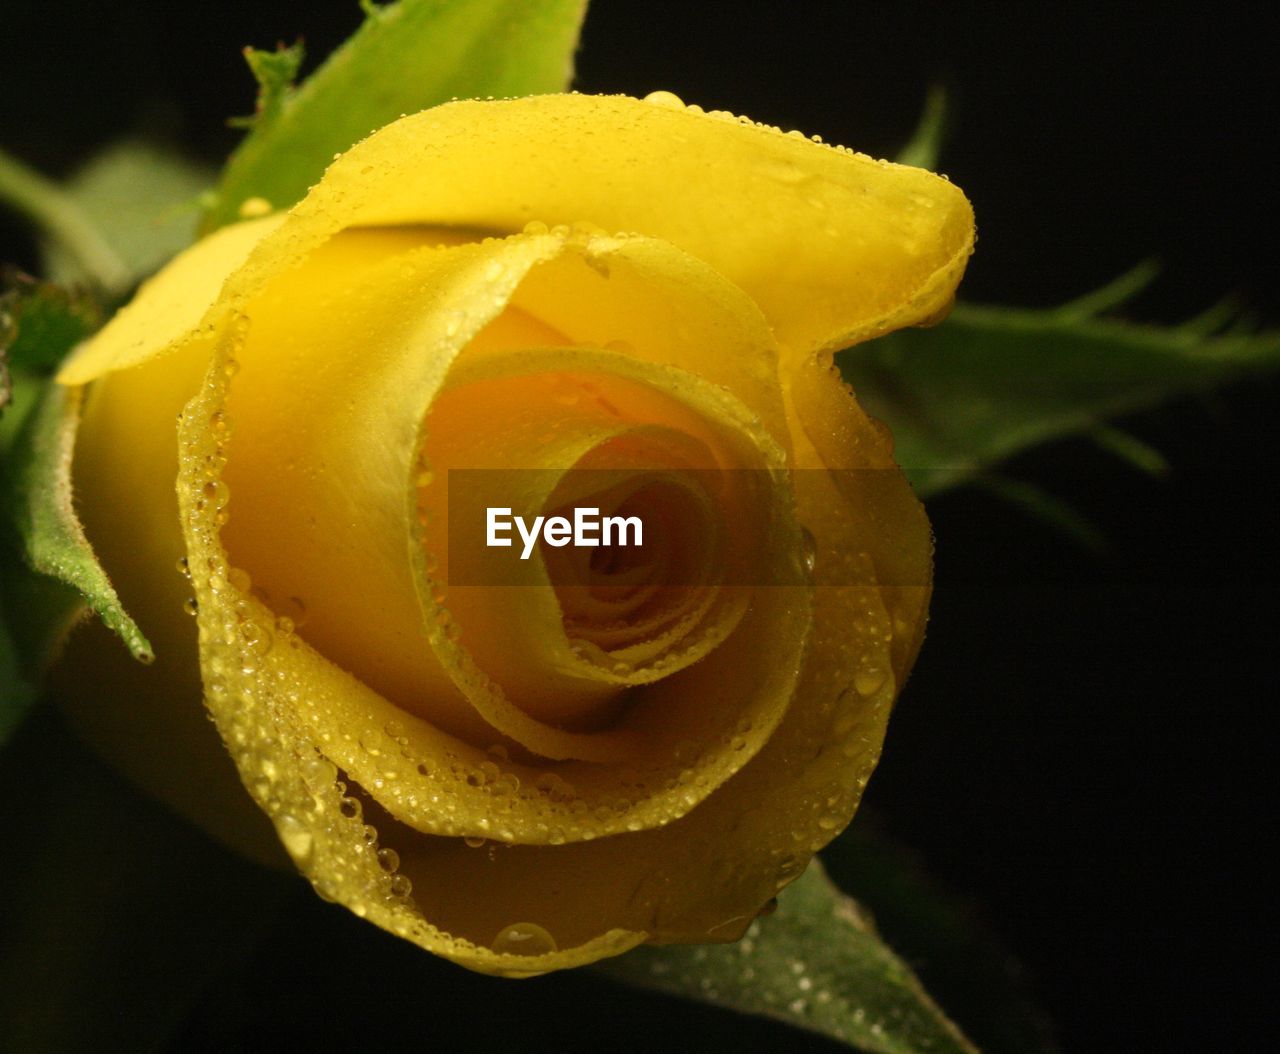 CLOSE-UP OF YELLOW ROSE BLOOMING IN BLACK BACKGROUND